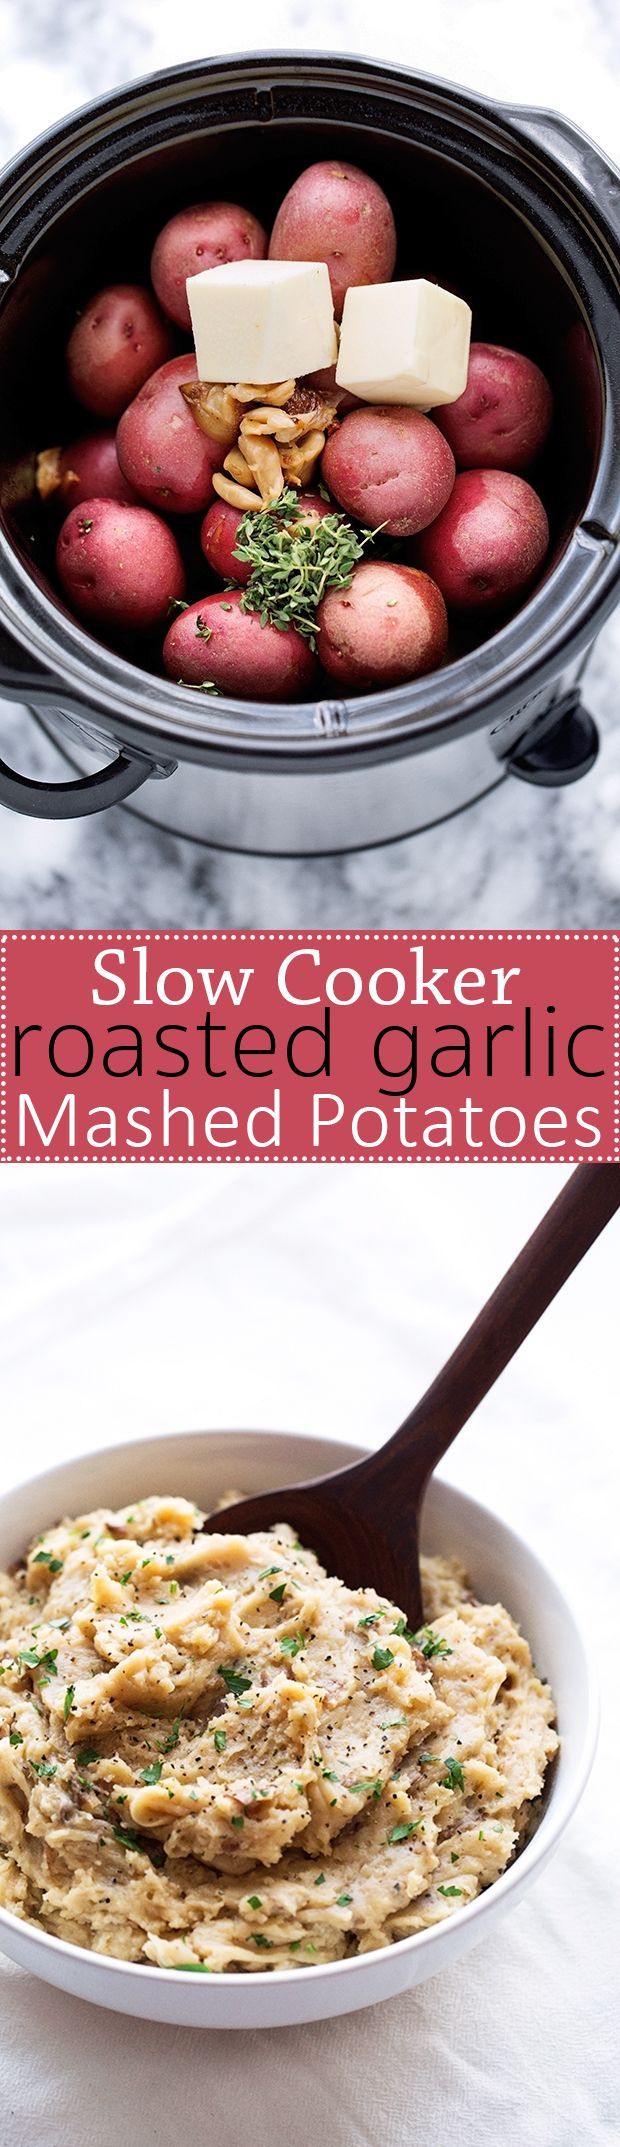 Roasted Garlic Mashed Potatoes – Learn how to make roasted garlic mashed potatoes in the slow cooker! Perfect for Thanksgiving!